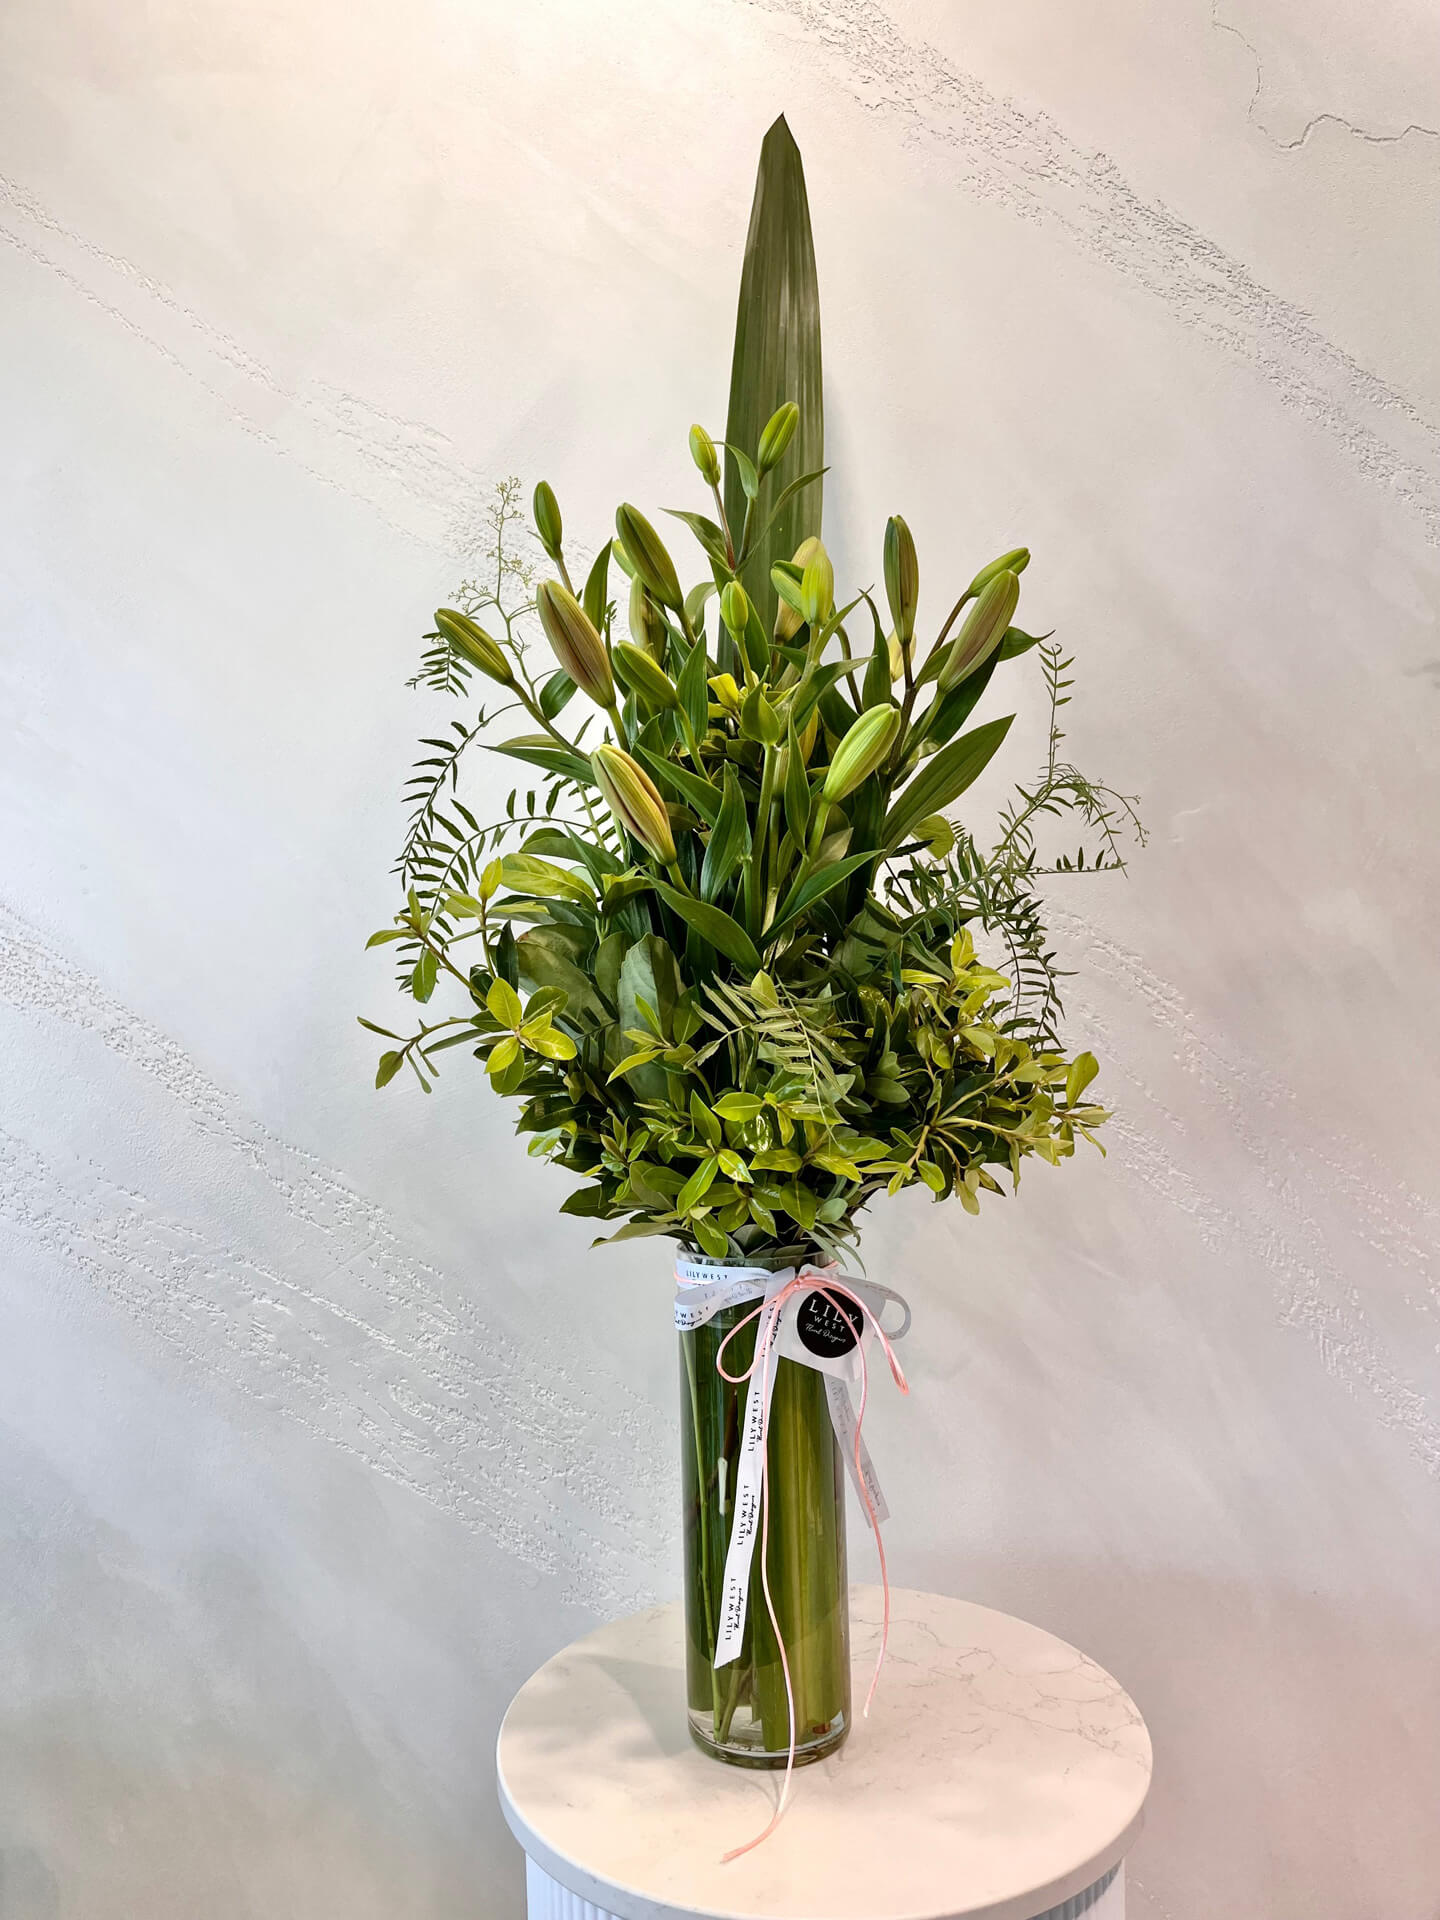 A tall arrangement of tiger lilies and lush green foliage in a tall clear glass vase with ribbon.